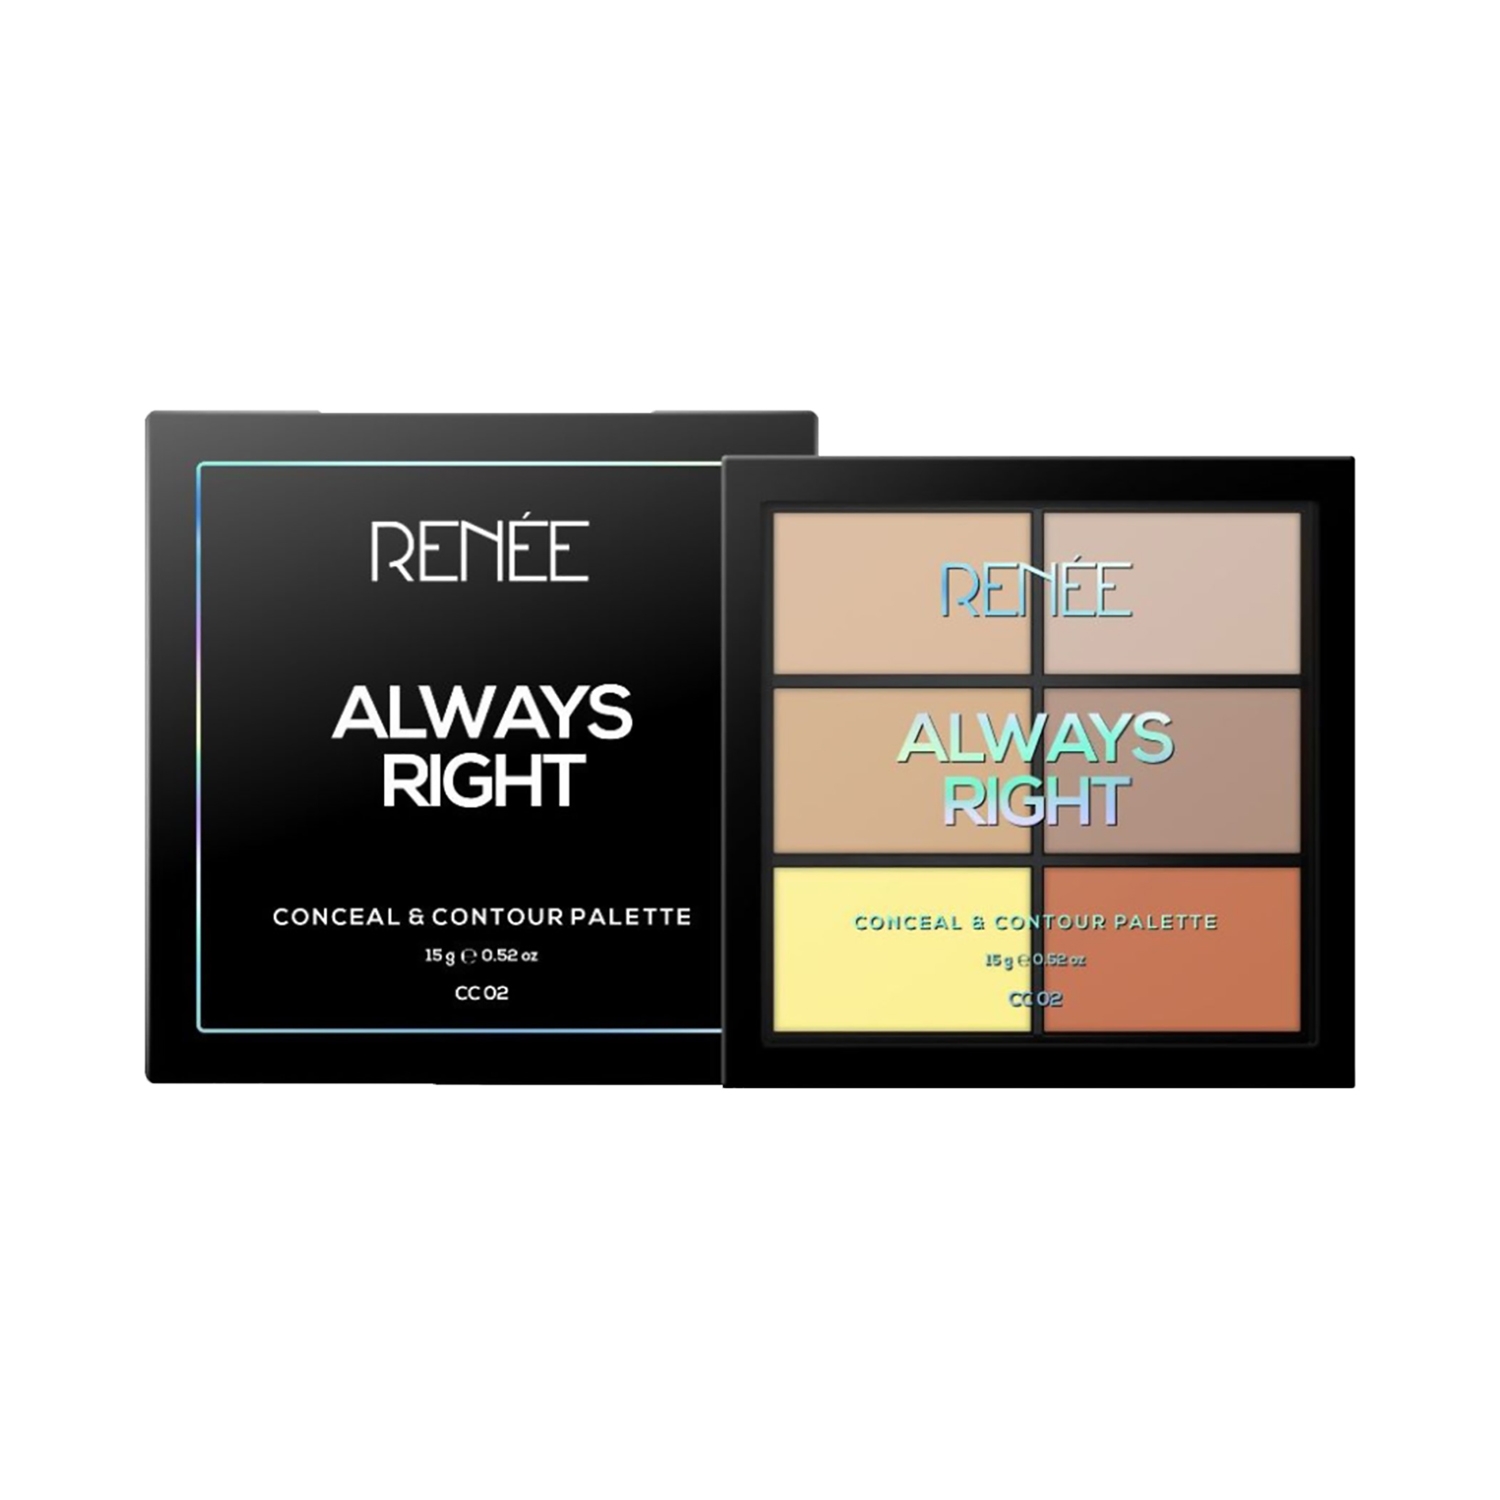 RENEE Always Right Conceal & Contour Palette - CC02 (15g)